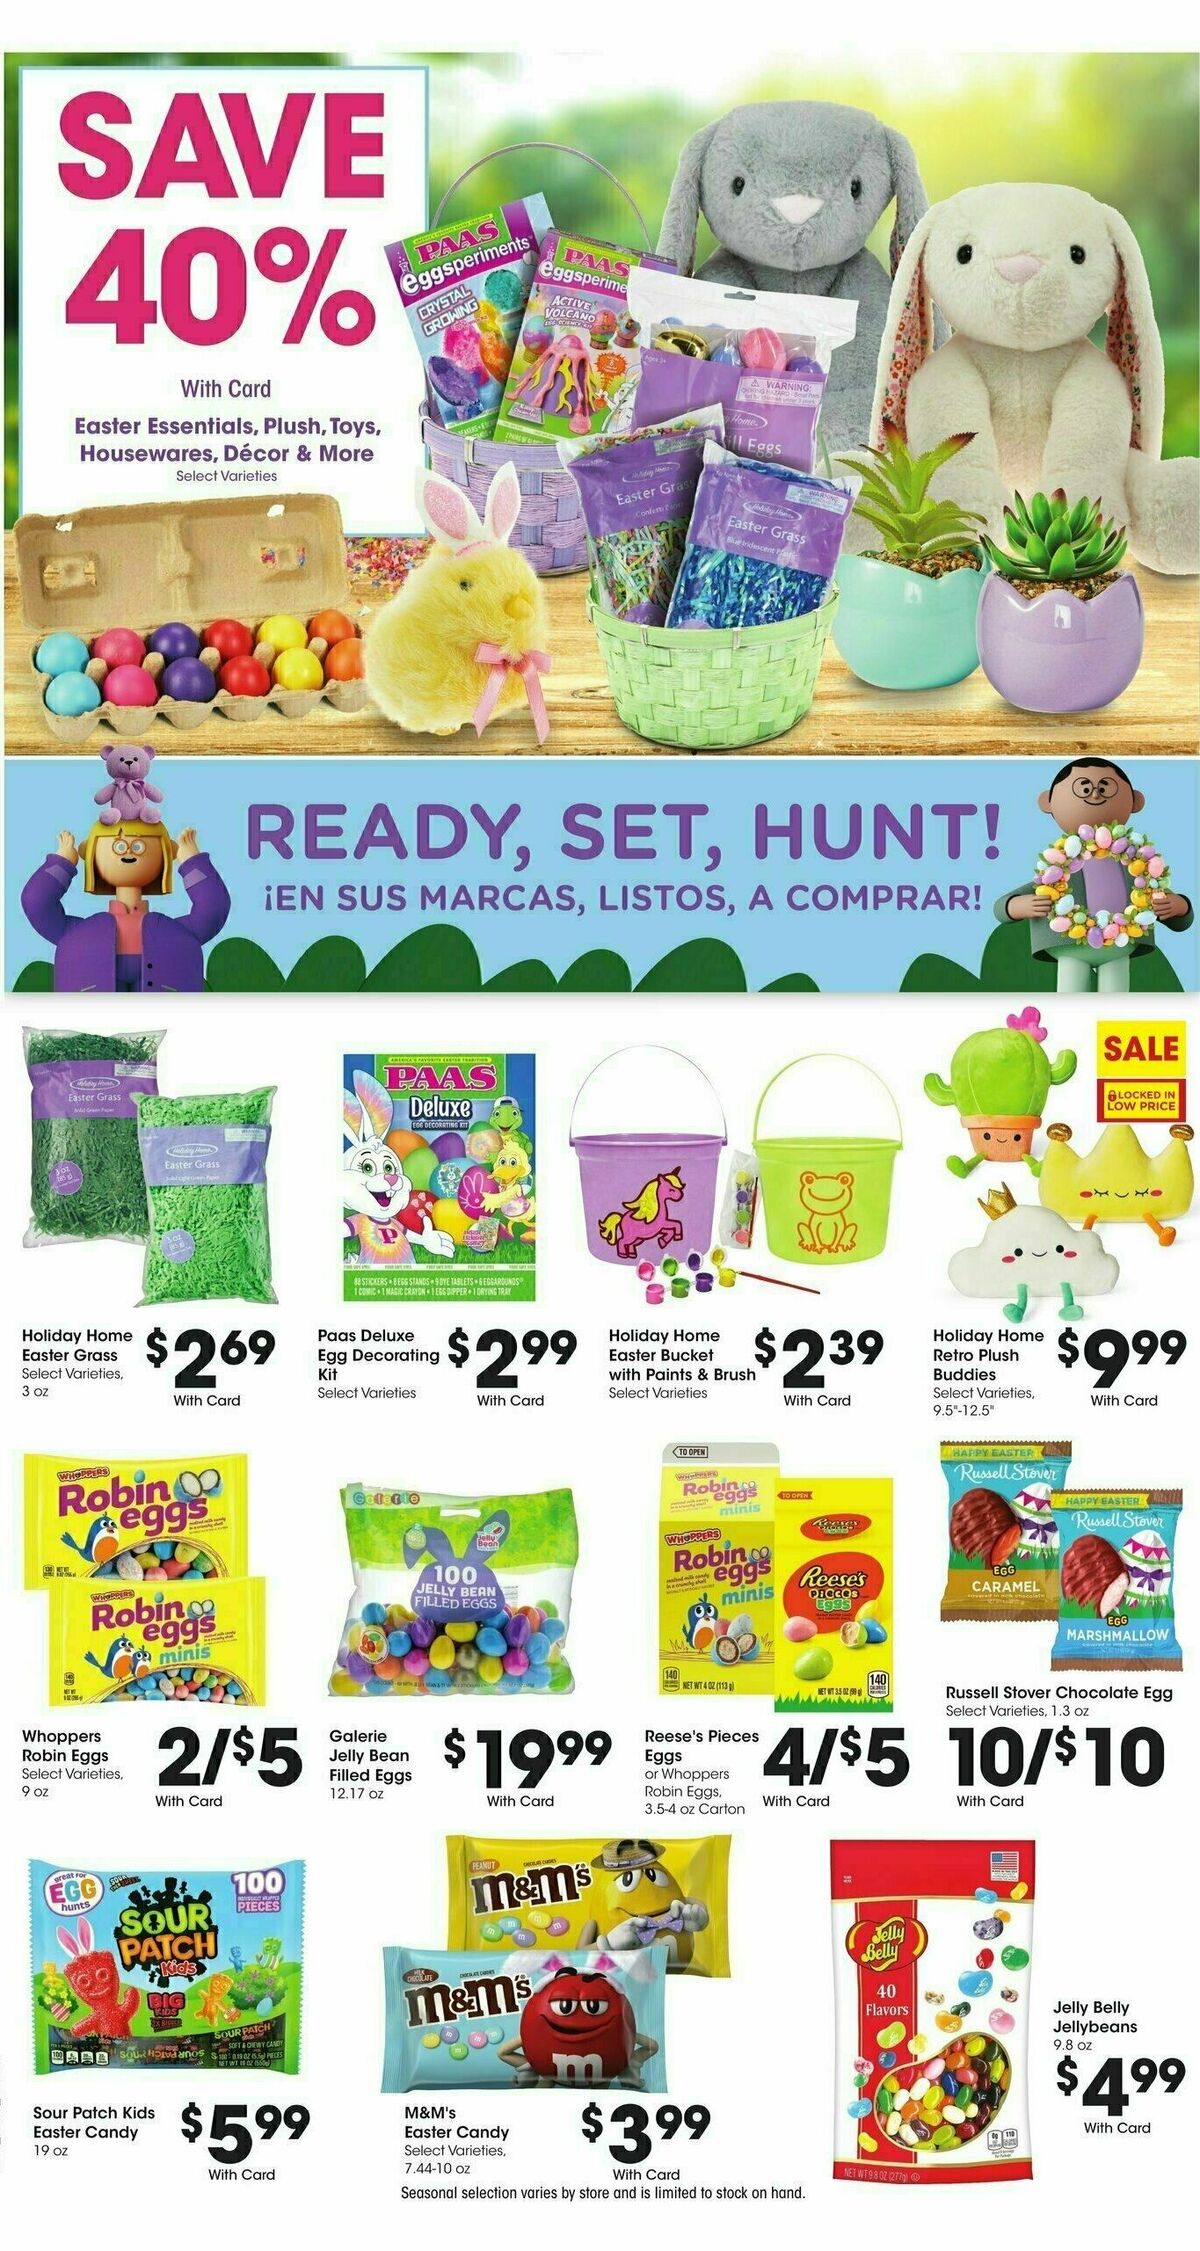 Ralphs Weekly Ad from March 20